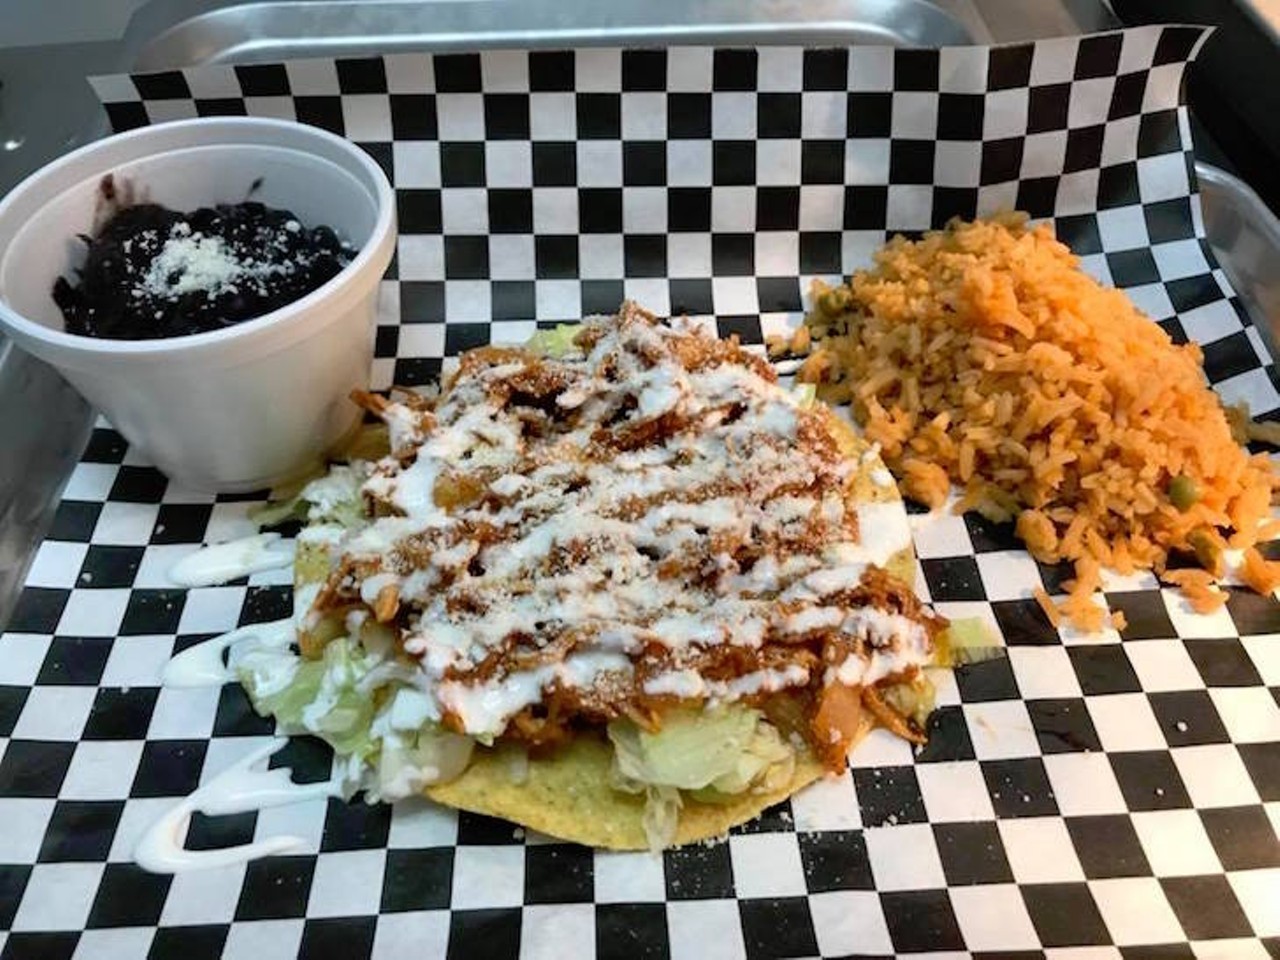 Check out Tostada Thursday, where you can pick from choice of chicken tinga or asada tostadas and remember to get those free rice and beans. .
Photo via Calle 3 M3xican Str33t Kitch3n